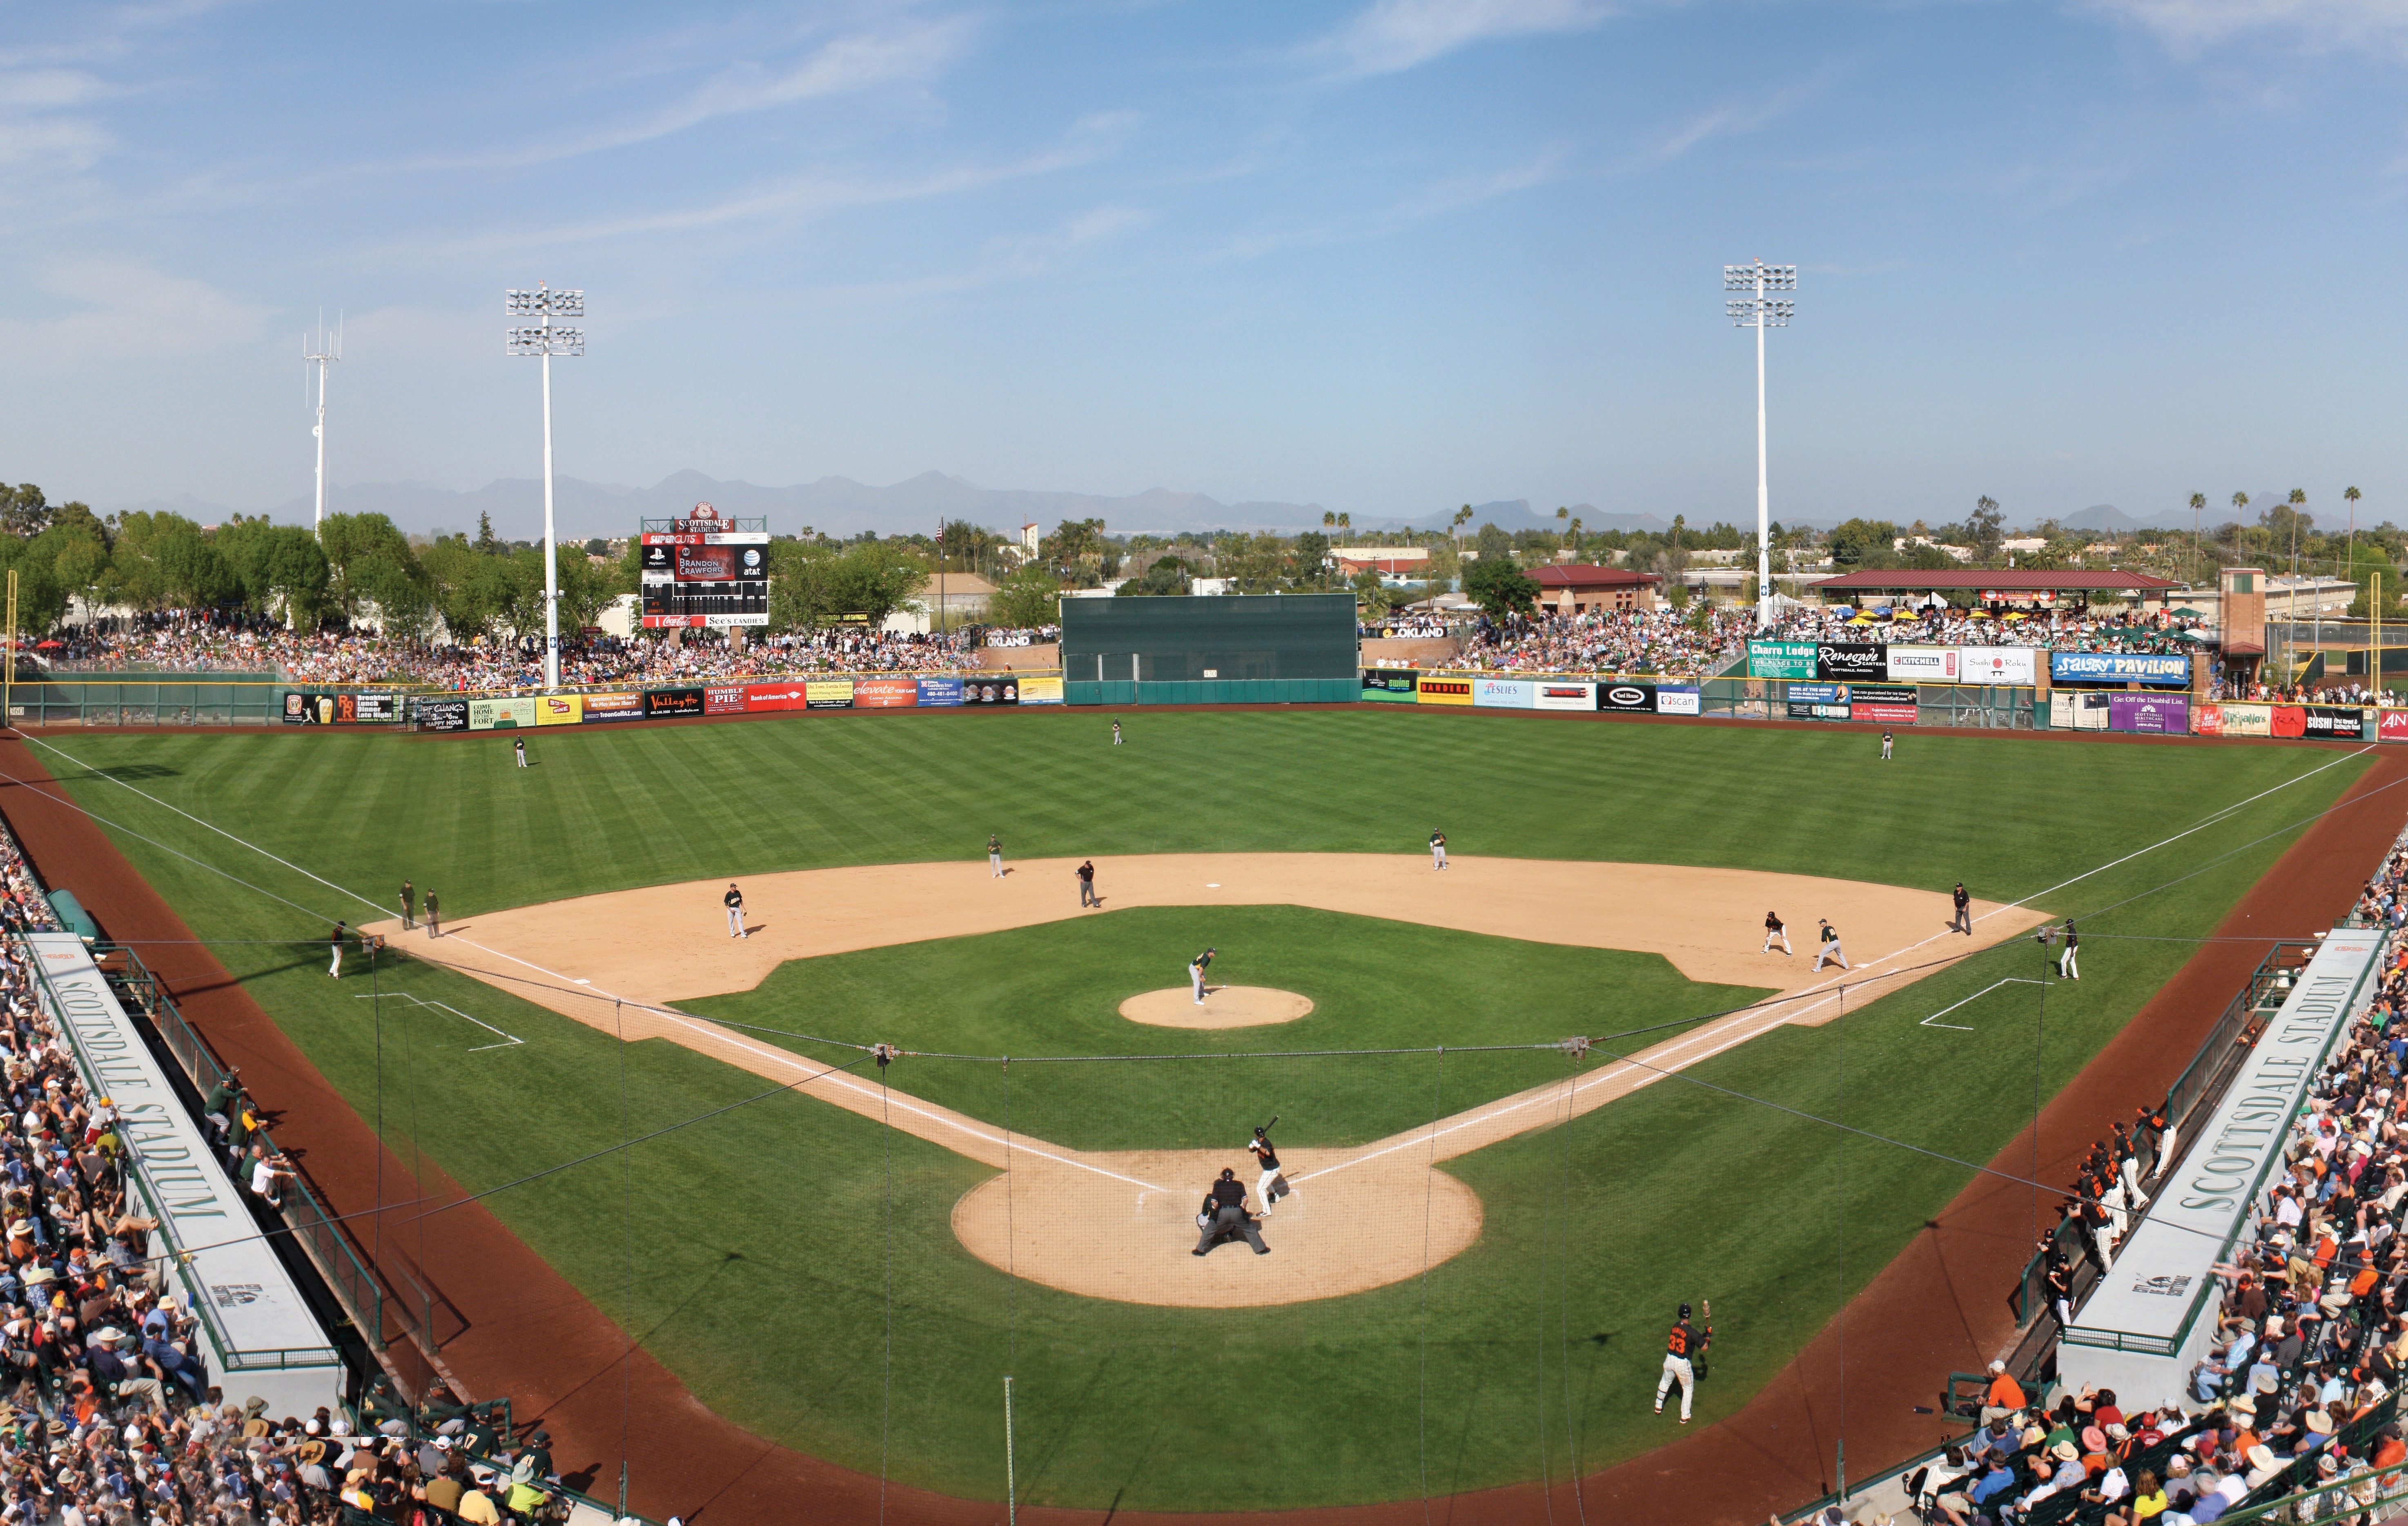 Major League Baseball Spring Training Locations - Perfect for a